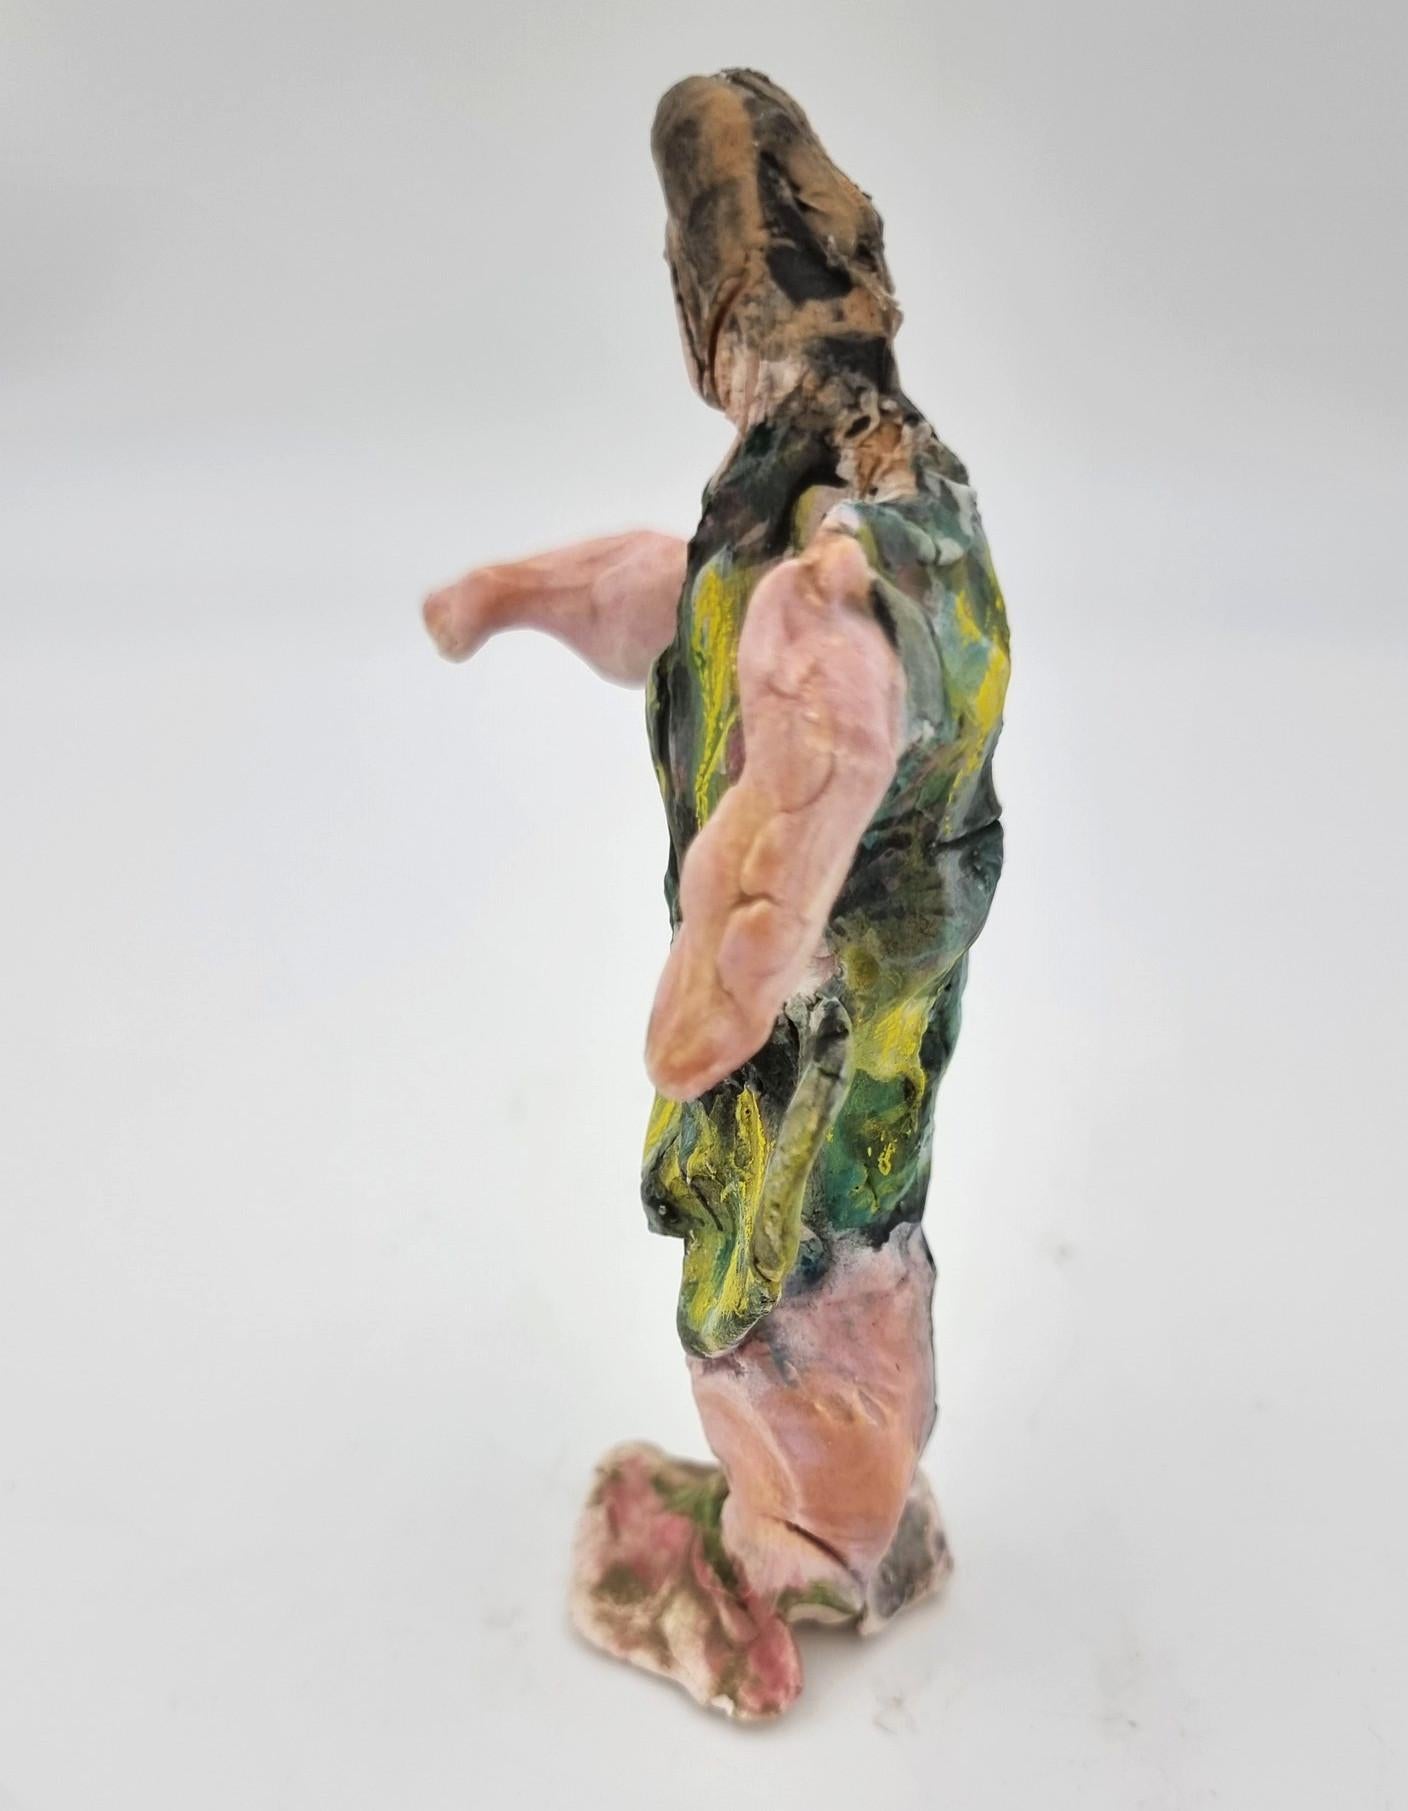 Ann Rothman
Green Ballerina (Circus, Whimsical, Viola Frey, Delicate, Playful, Fun, Cirque du Soleil, The Ringling Bros., Barnum & Bailey)
2022
Porcelain, Low Fire Glazes, Crayons, Watercolors
5 x 2.75 x 1.5 inches
COA provided
Ref.: